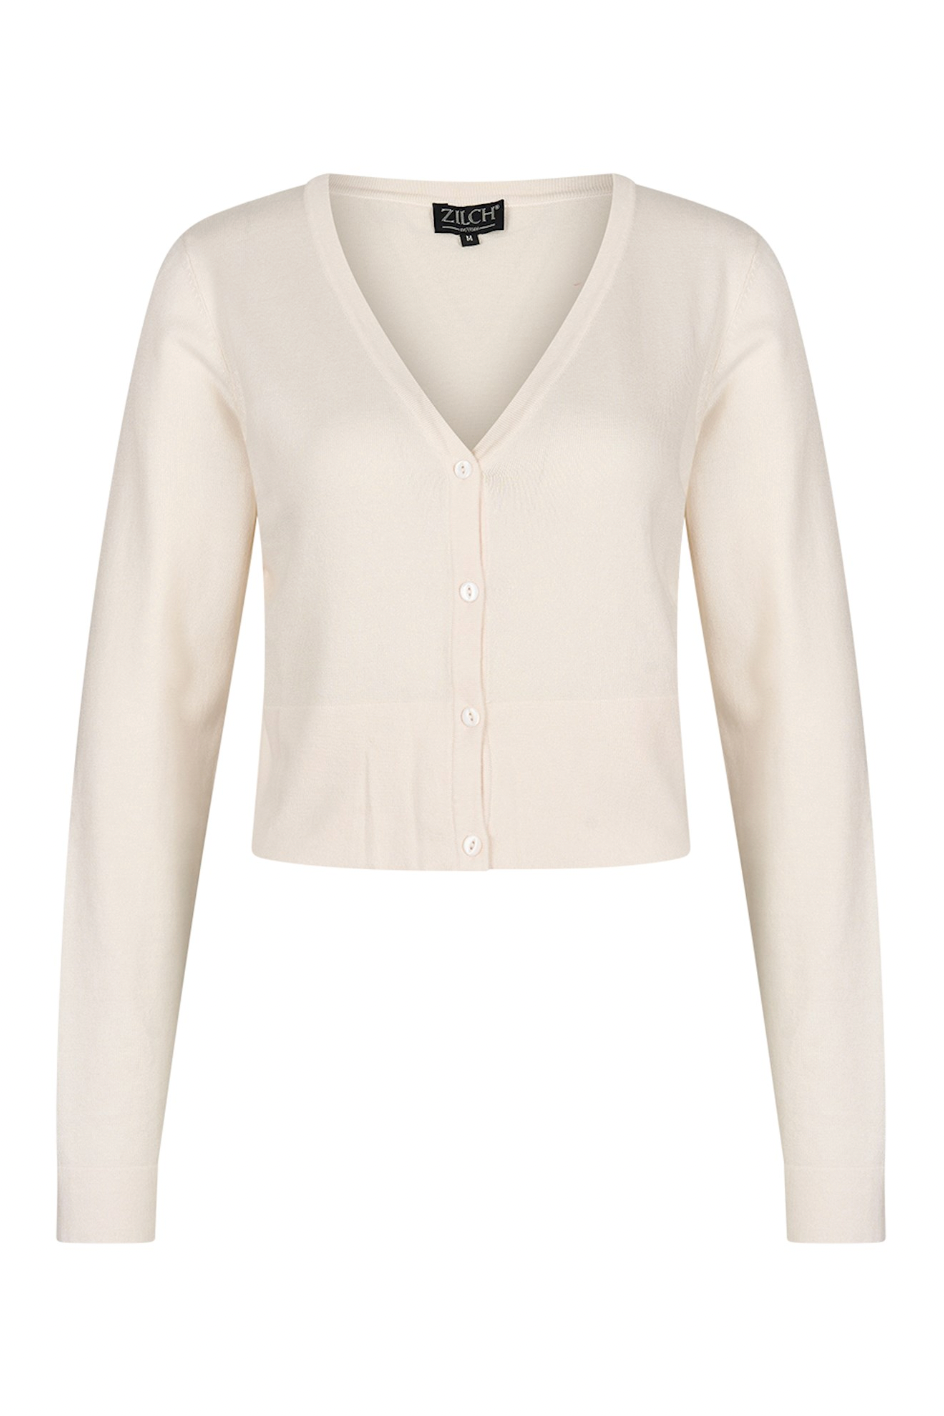 Zilch Short Cardigan in Off White-Womens-Ohh! By Gum - Shop Sustainable